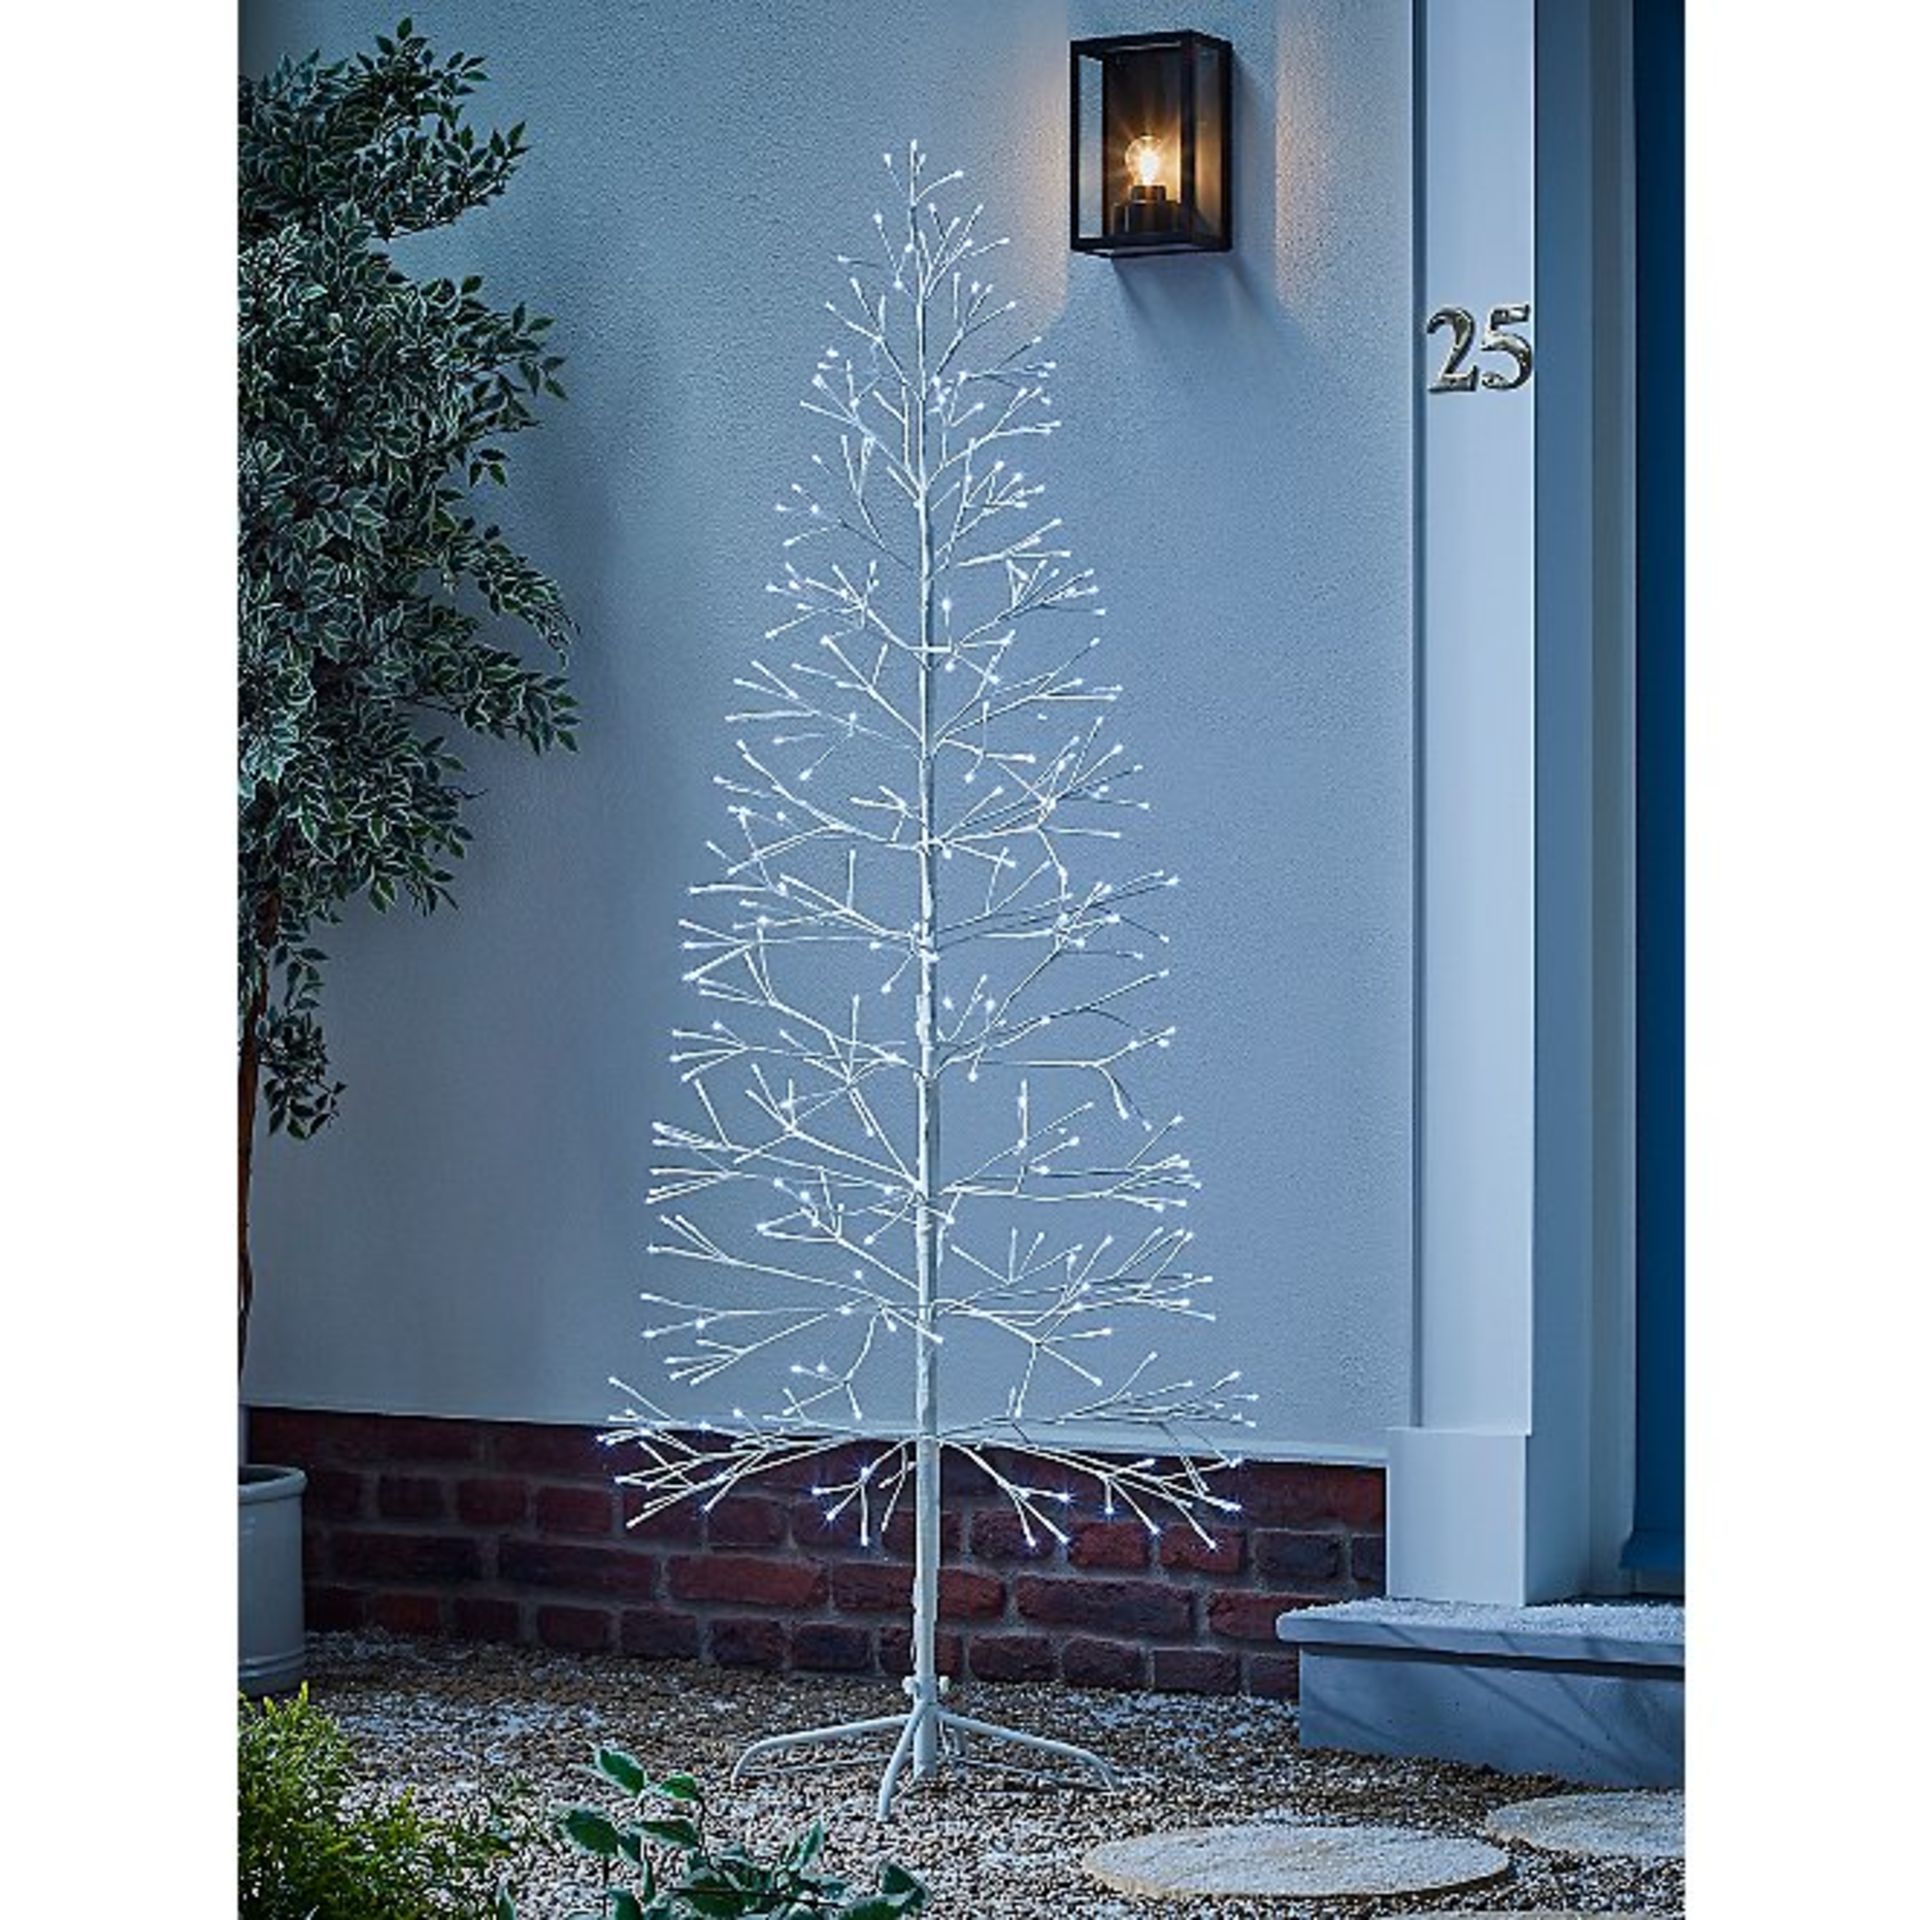 (R15B) Lighting. 2 Items. 1 X Floor Standing White LED Tree & 1 X Wicker Heart Lamp (May Have Undel